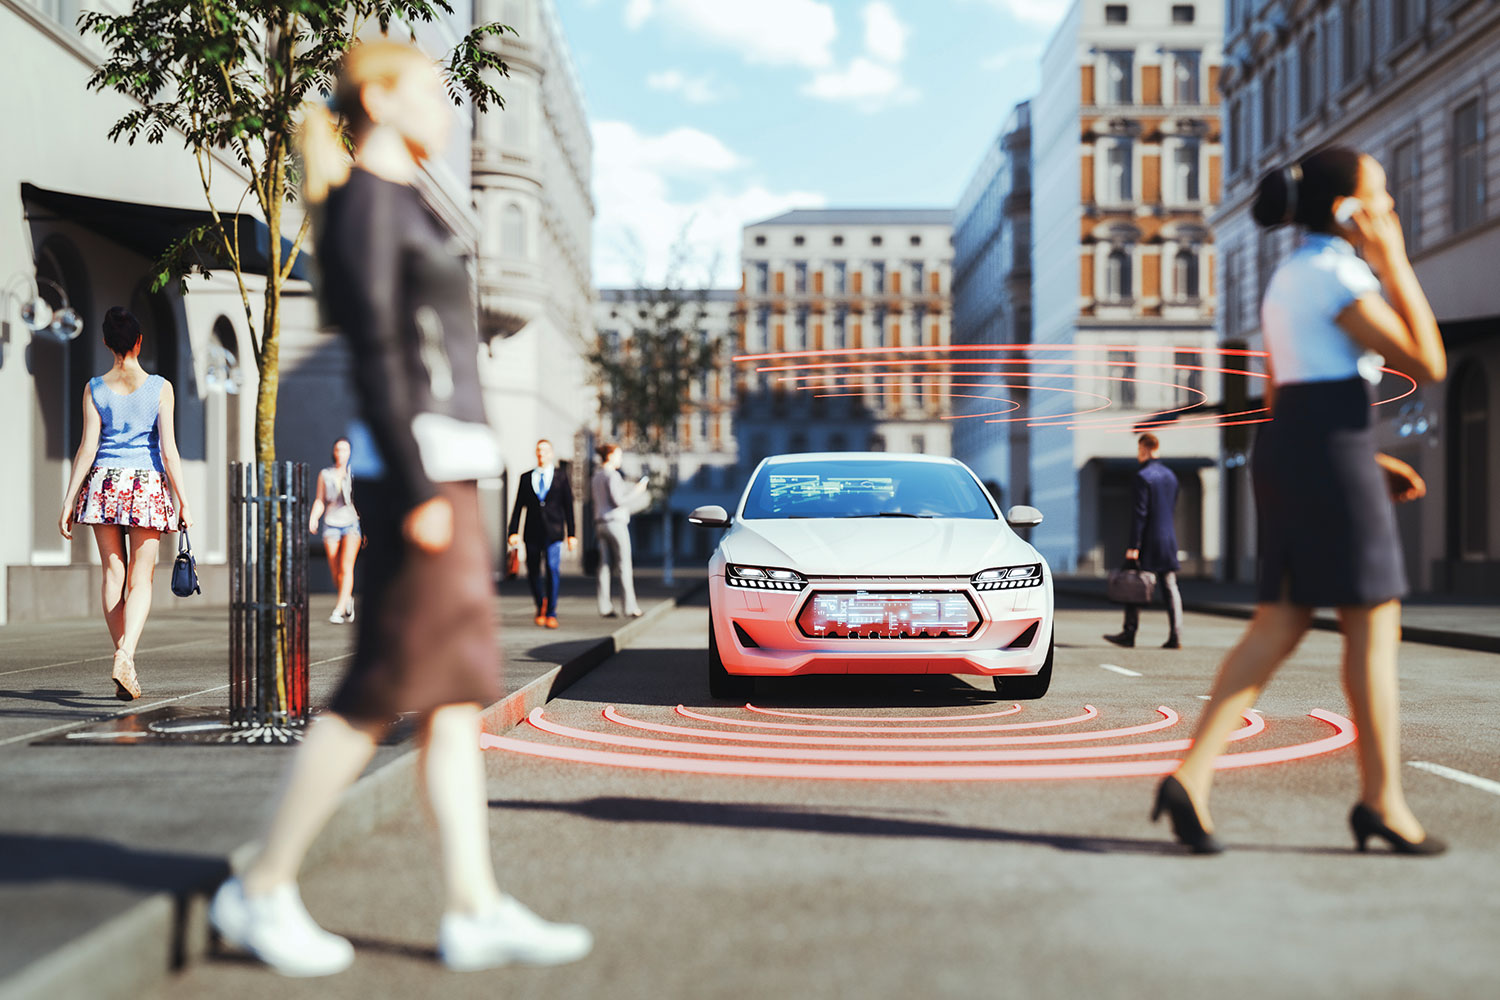 graphic of self-driving car with computer display on windscreen and red rings around it indicating sensors, in the middle of urban road with people crossing in front of it